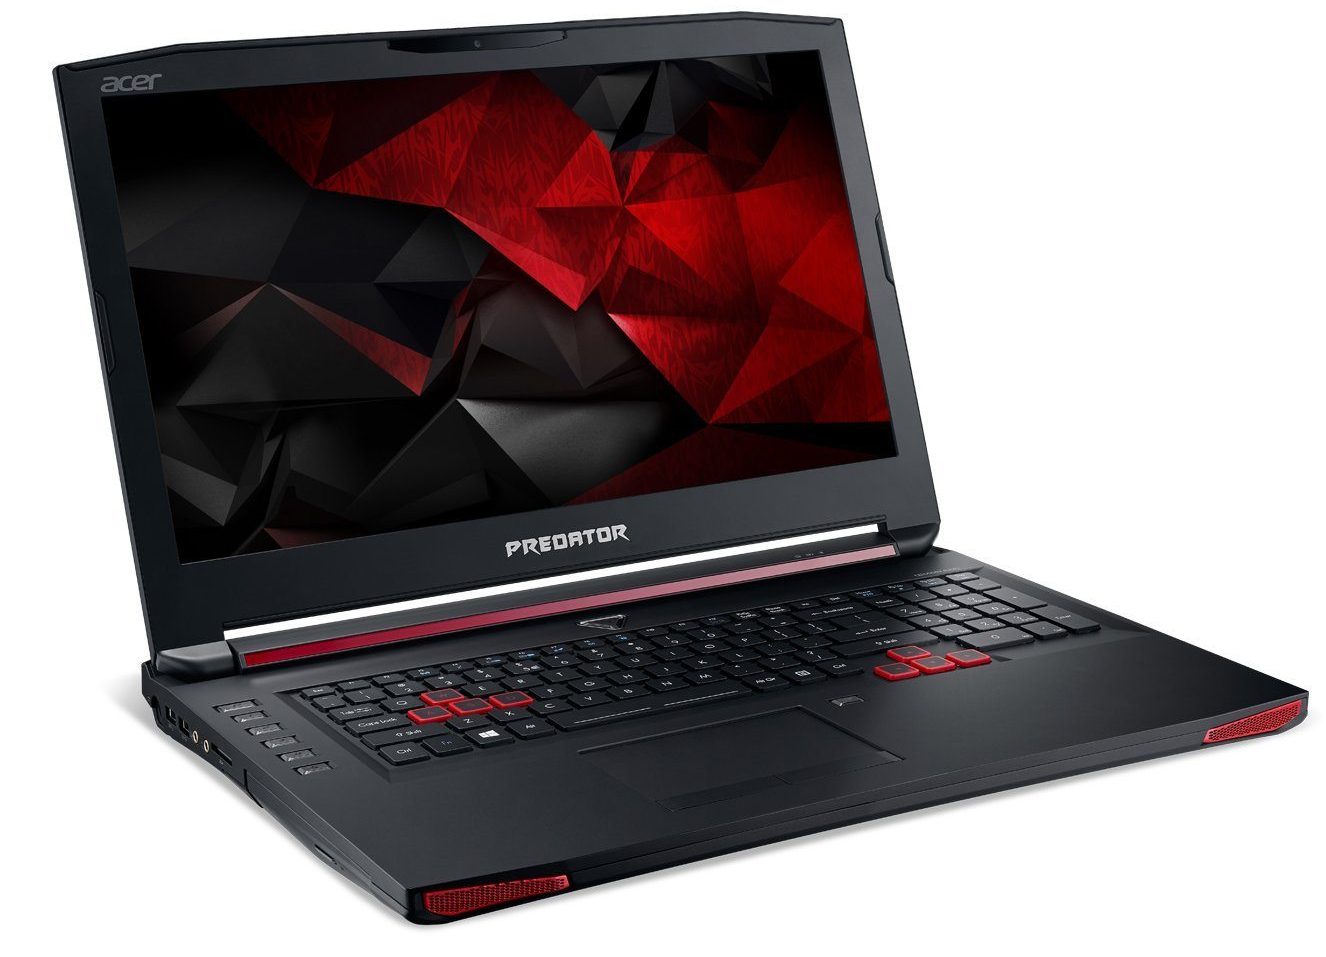 How much is an Acer Predator?